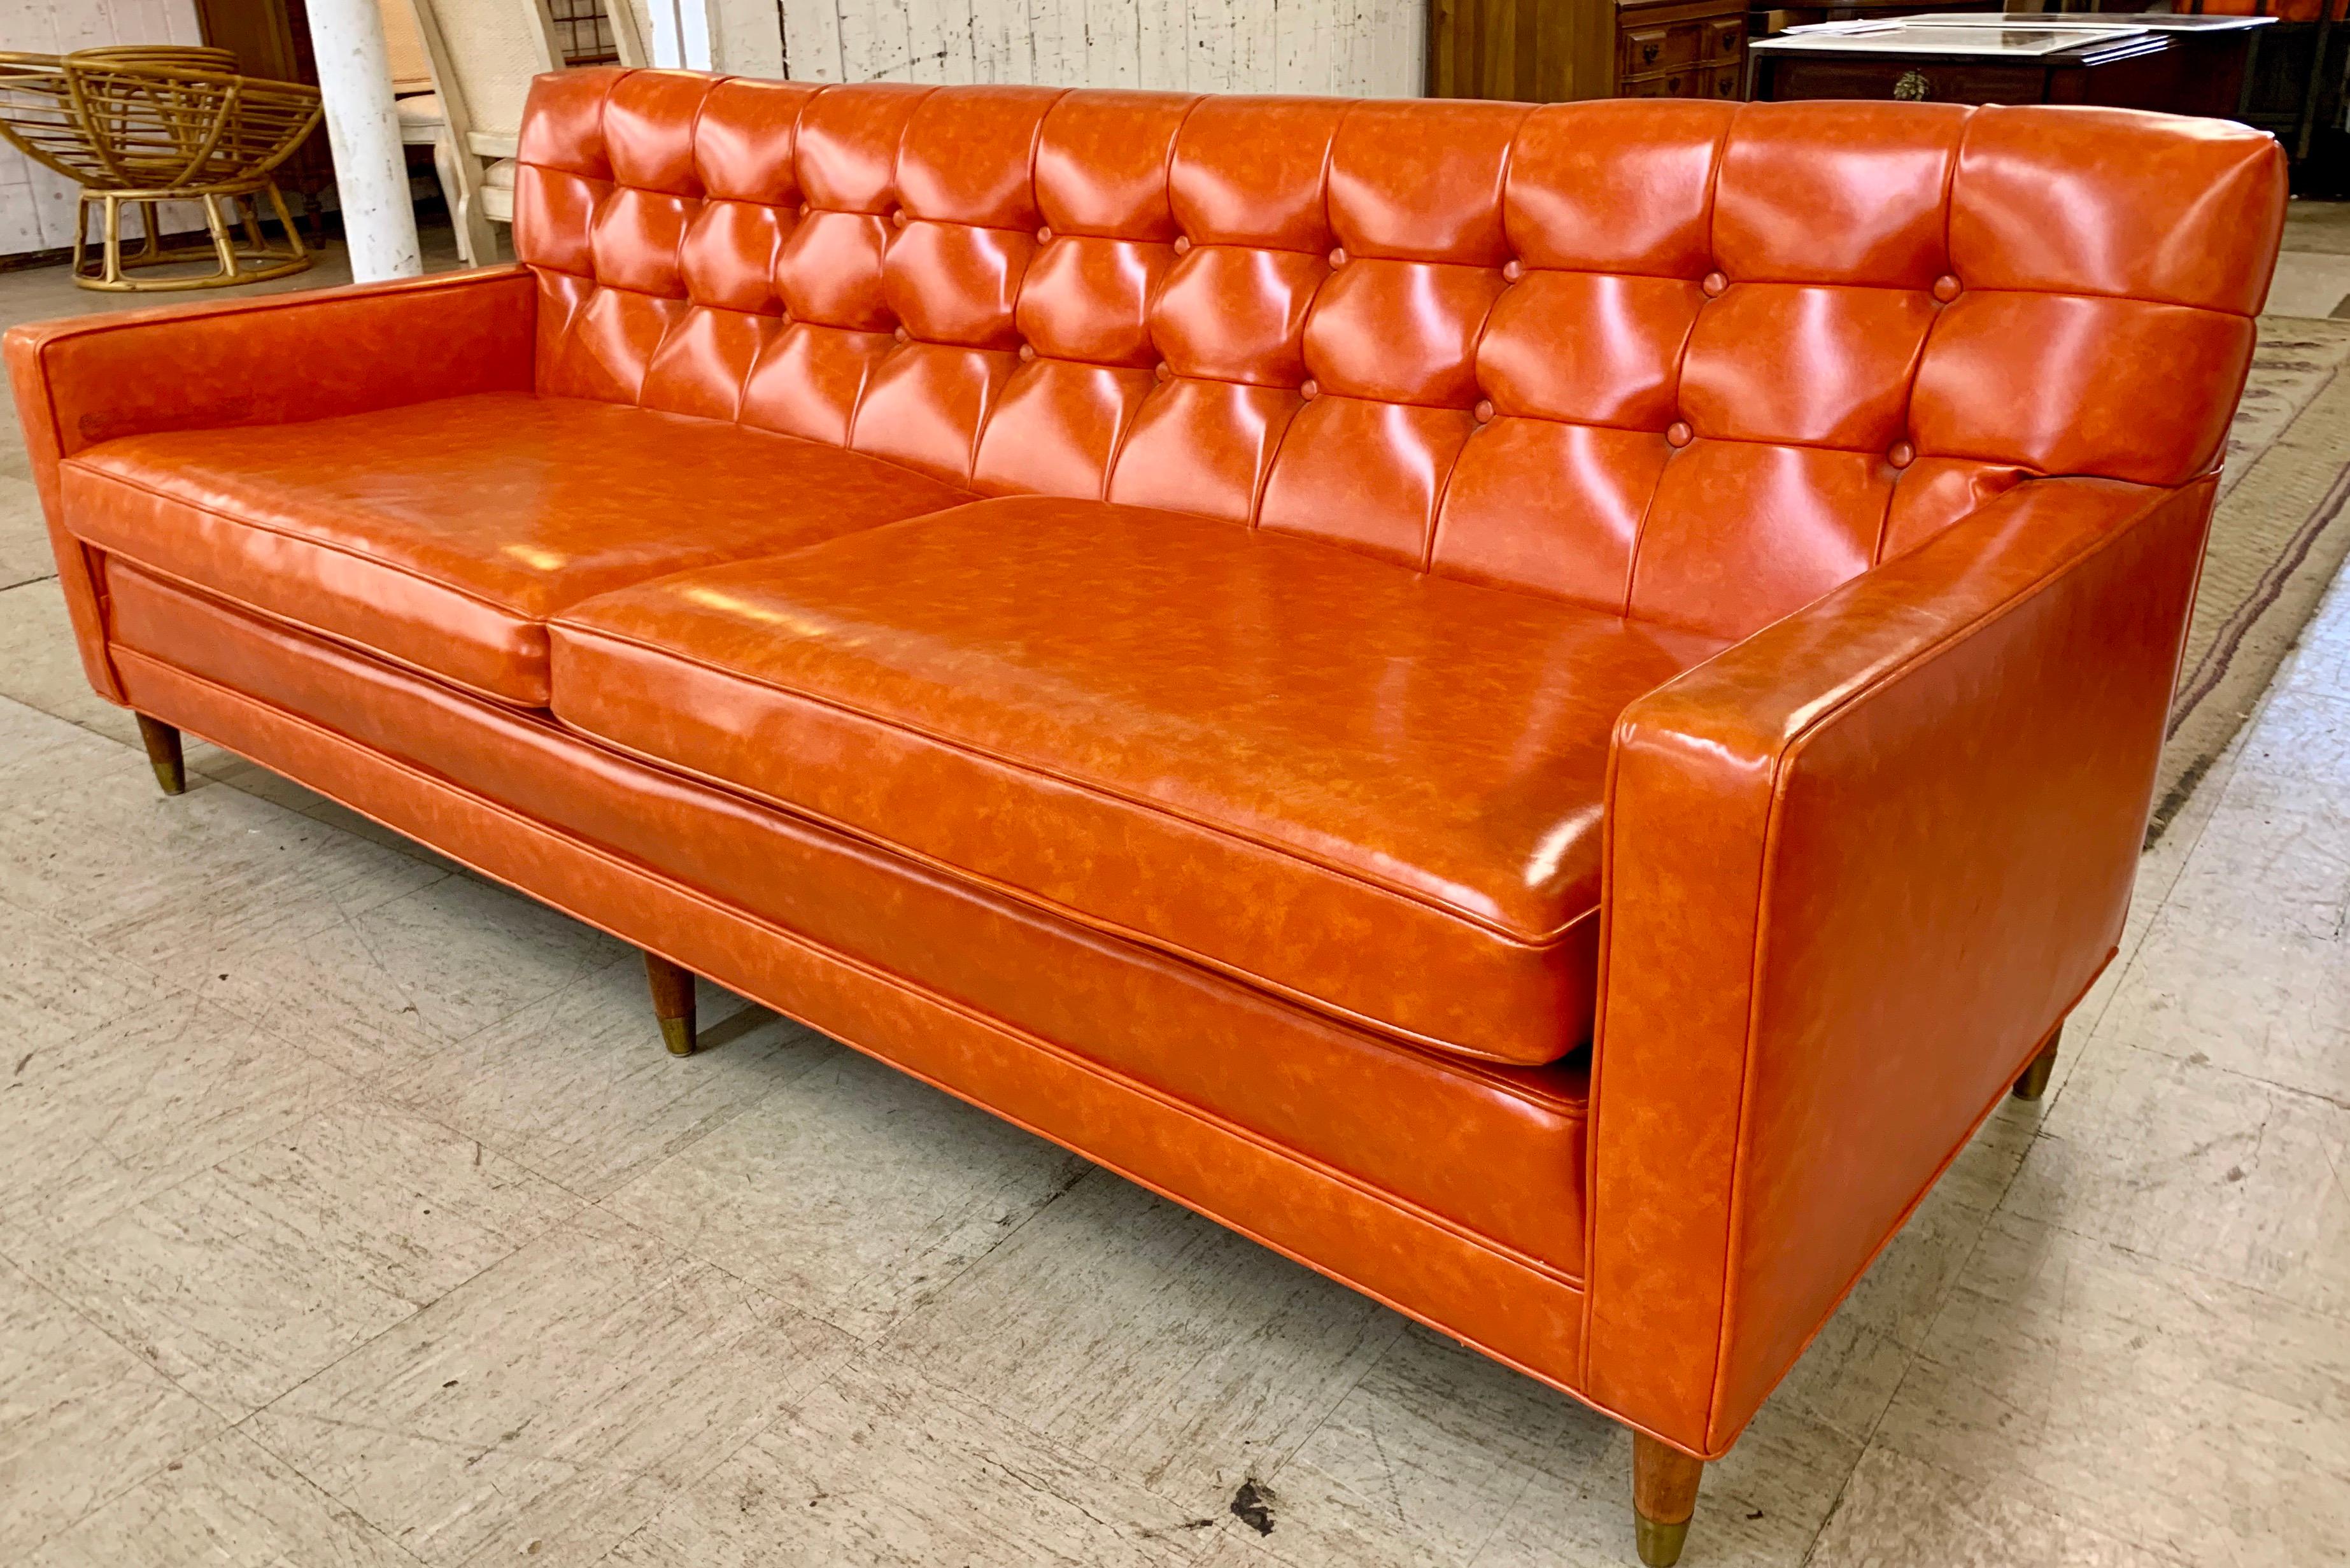 Great Mid-Century Modern period piece with all original orange vinyl upholstery and button tufted back.